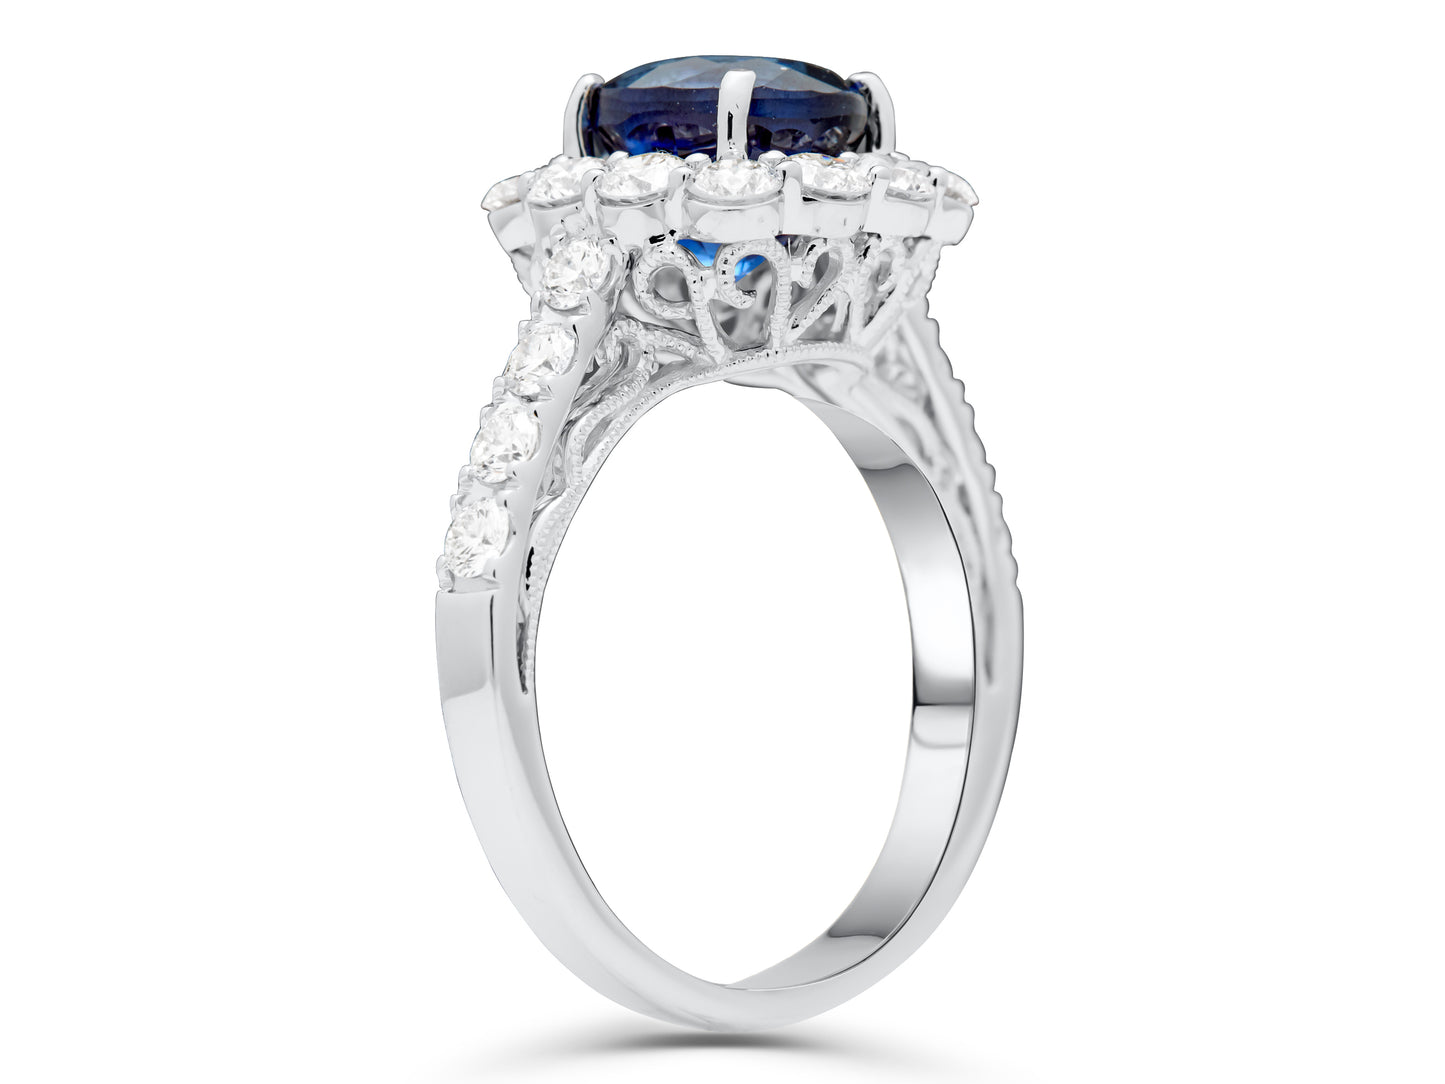 The Queen's Sapphire Ring